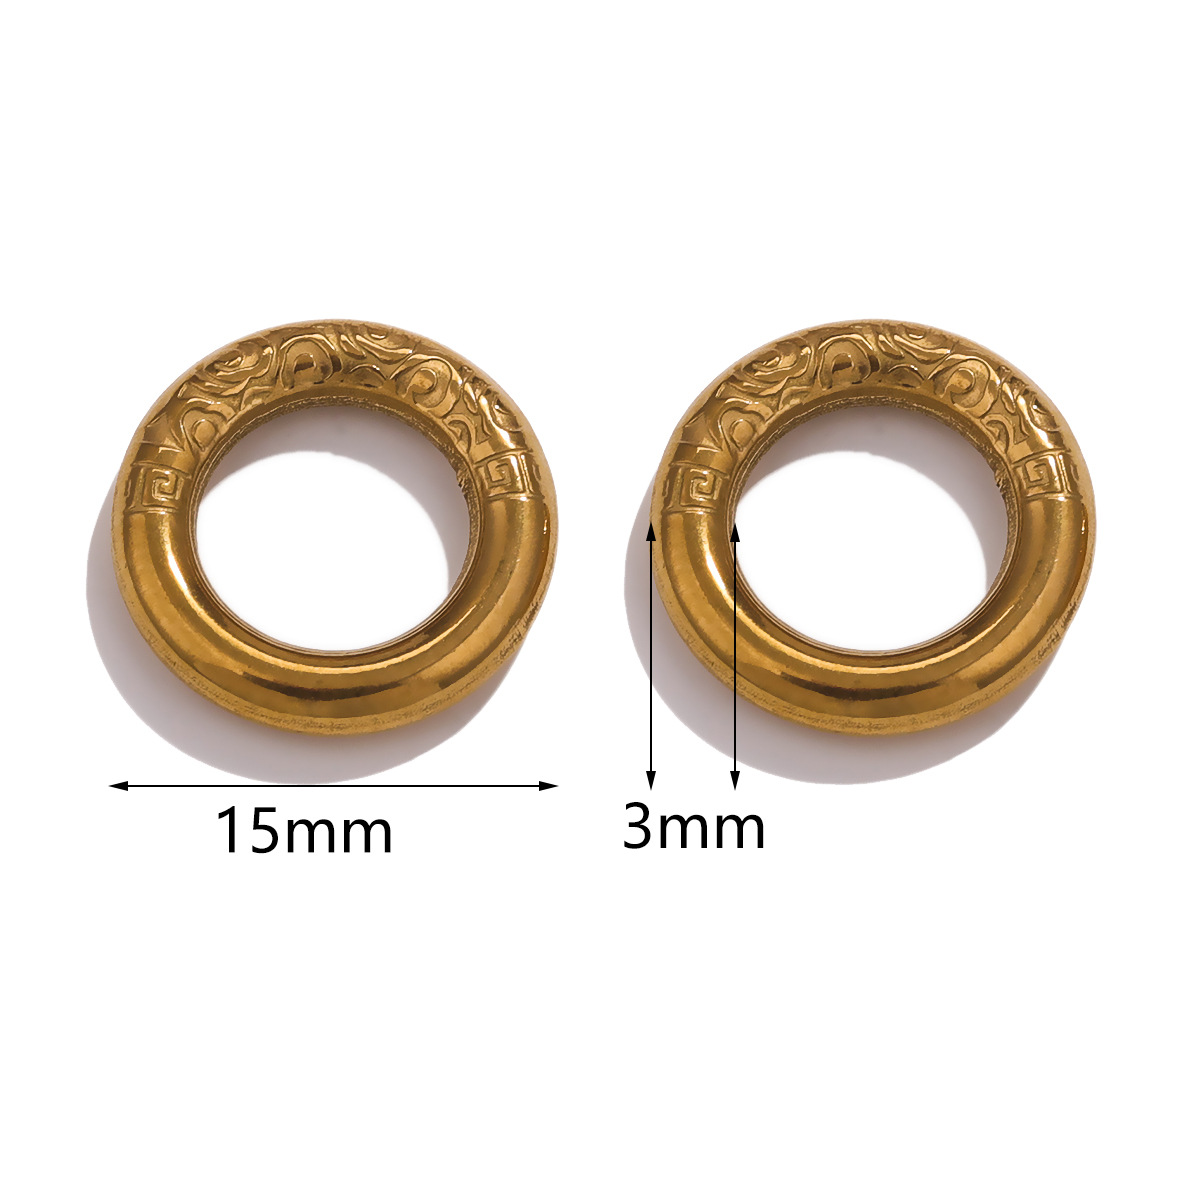 3:15mm - Gold